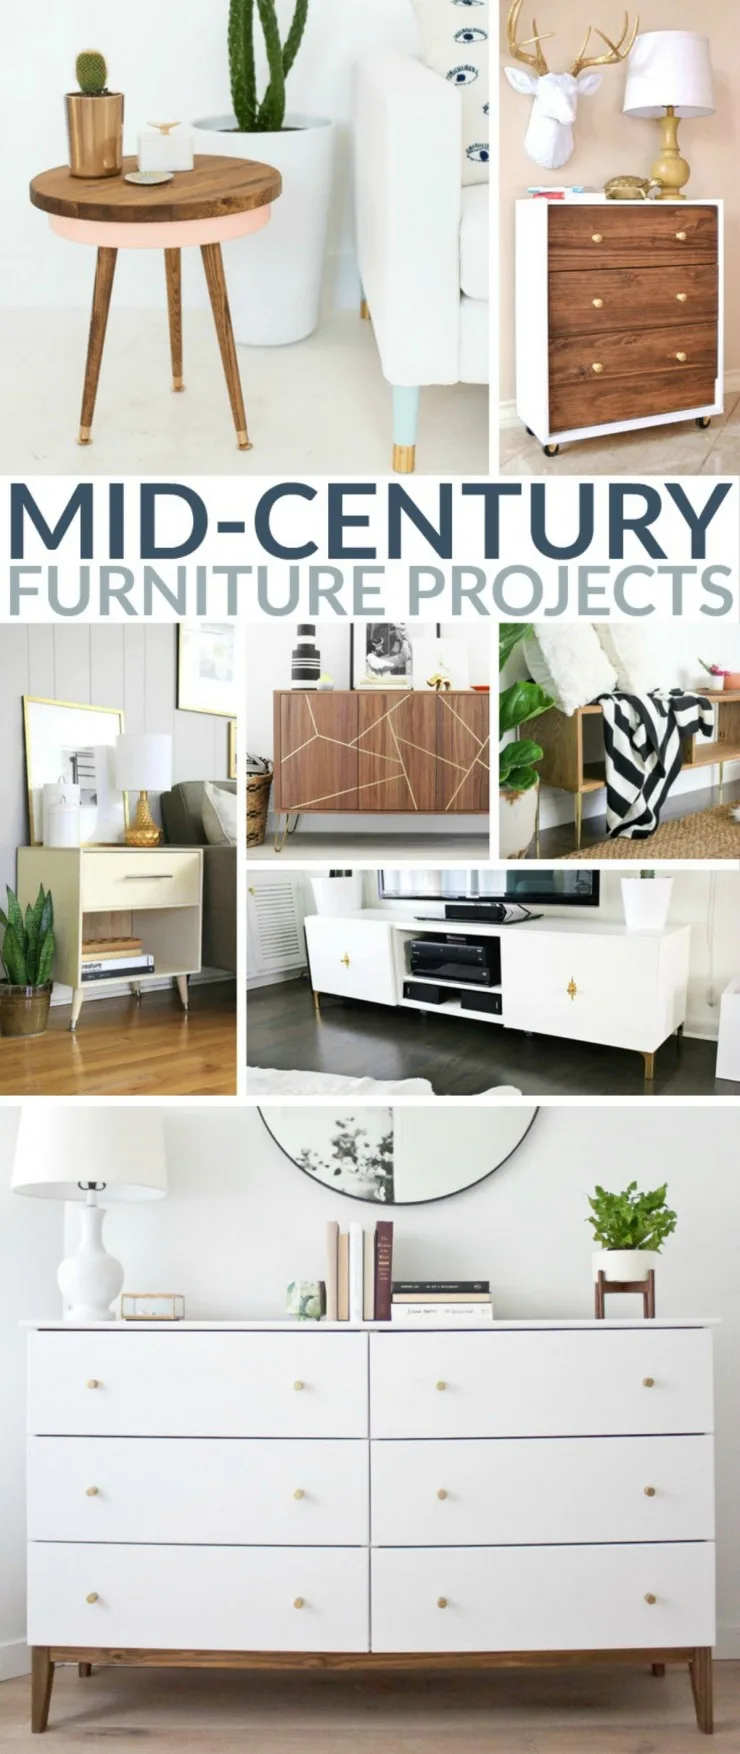 DIY Mid-Century furniture. So you want a Mid Century chair? No problem! Or maybe a dresser? Totally doable. If you're still having doubts, take a look at these awesome Mid-Century furniture projects